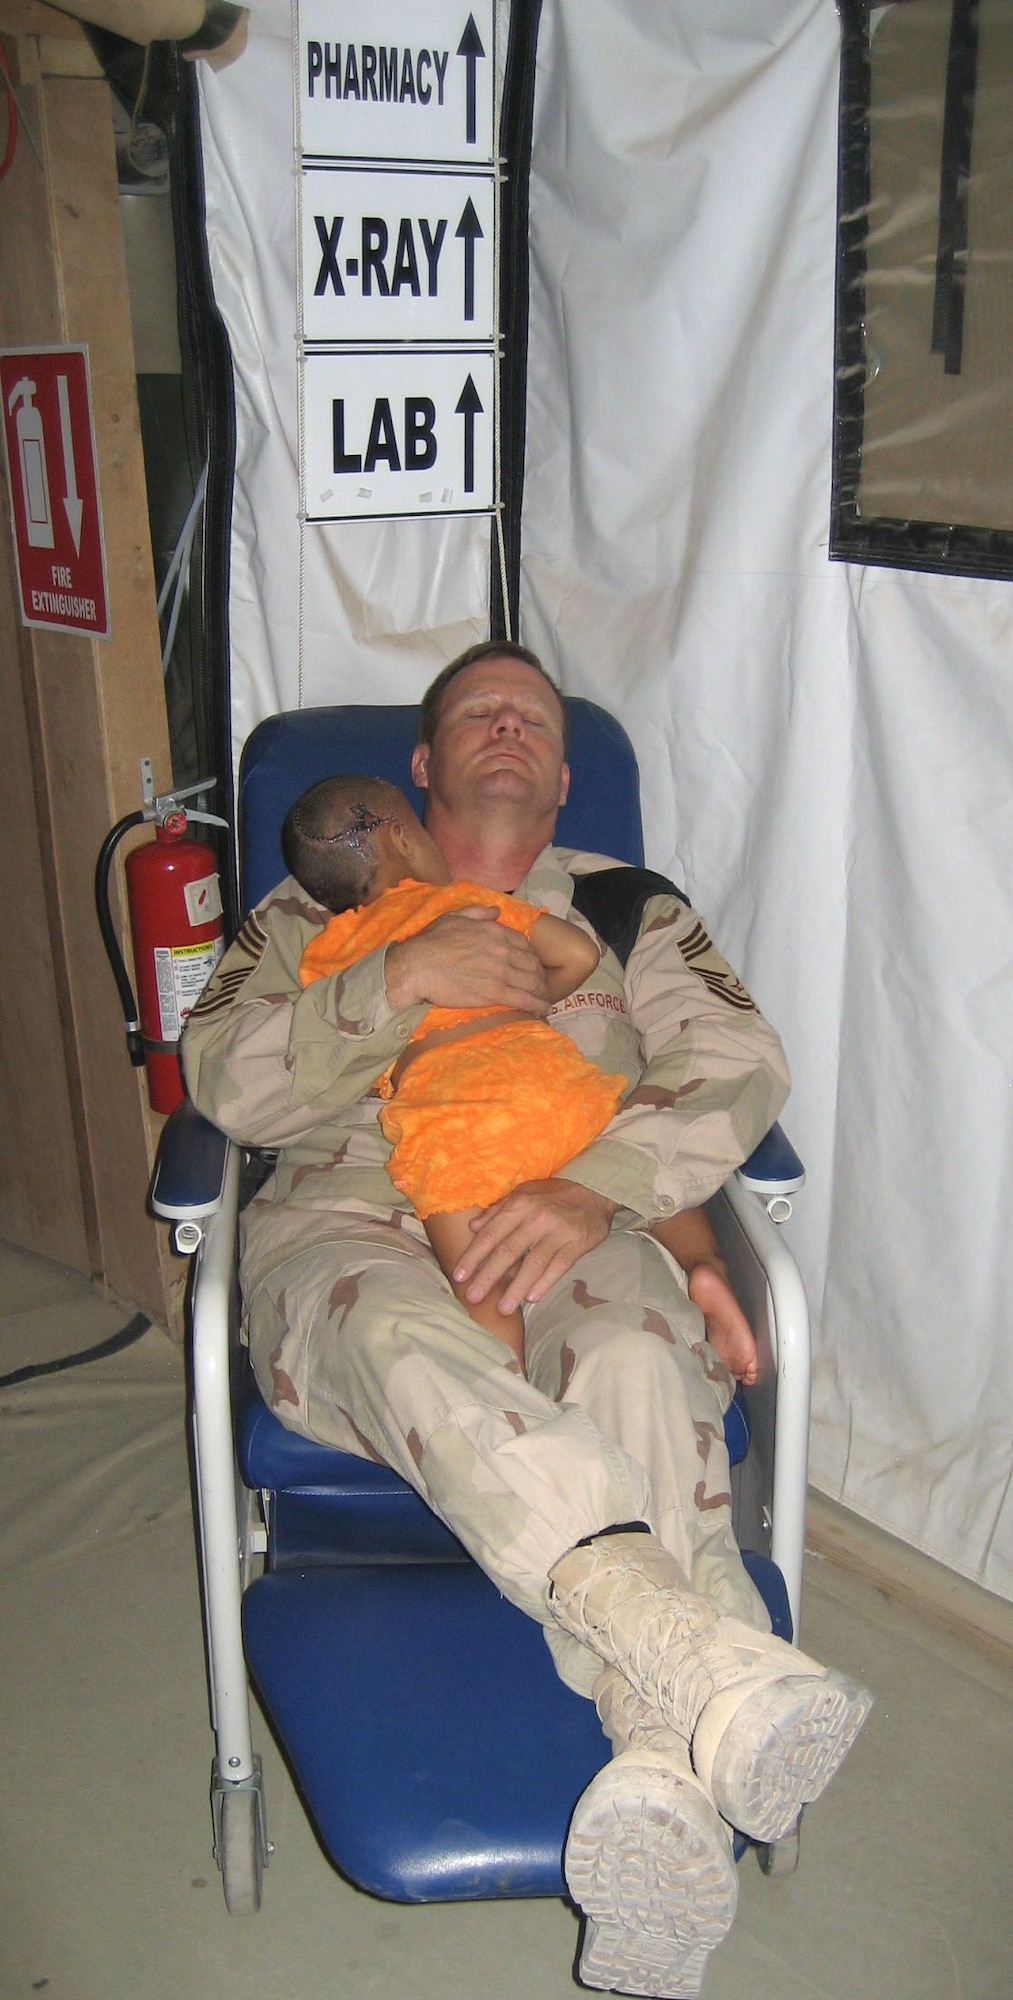 Chief Master Sgt. John Gebhardt cradles a young Iraqi girl as they both sleep in the hospital. The girl's entire family was executed by insurgents. The killers shot her in the head but she survived. The girl received treatment at the U.S. military hospital in Balad, but cries often. According to nurses at the facility, Chief Gebhardt is the only one who can calm down the girl, so he holds her at night while they both sleep in a chair. Chief Gebhardt was assigned to the 332nd Expeditionary Medical Group at Balad Air Base, Iraq. (Courtesy Photo)